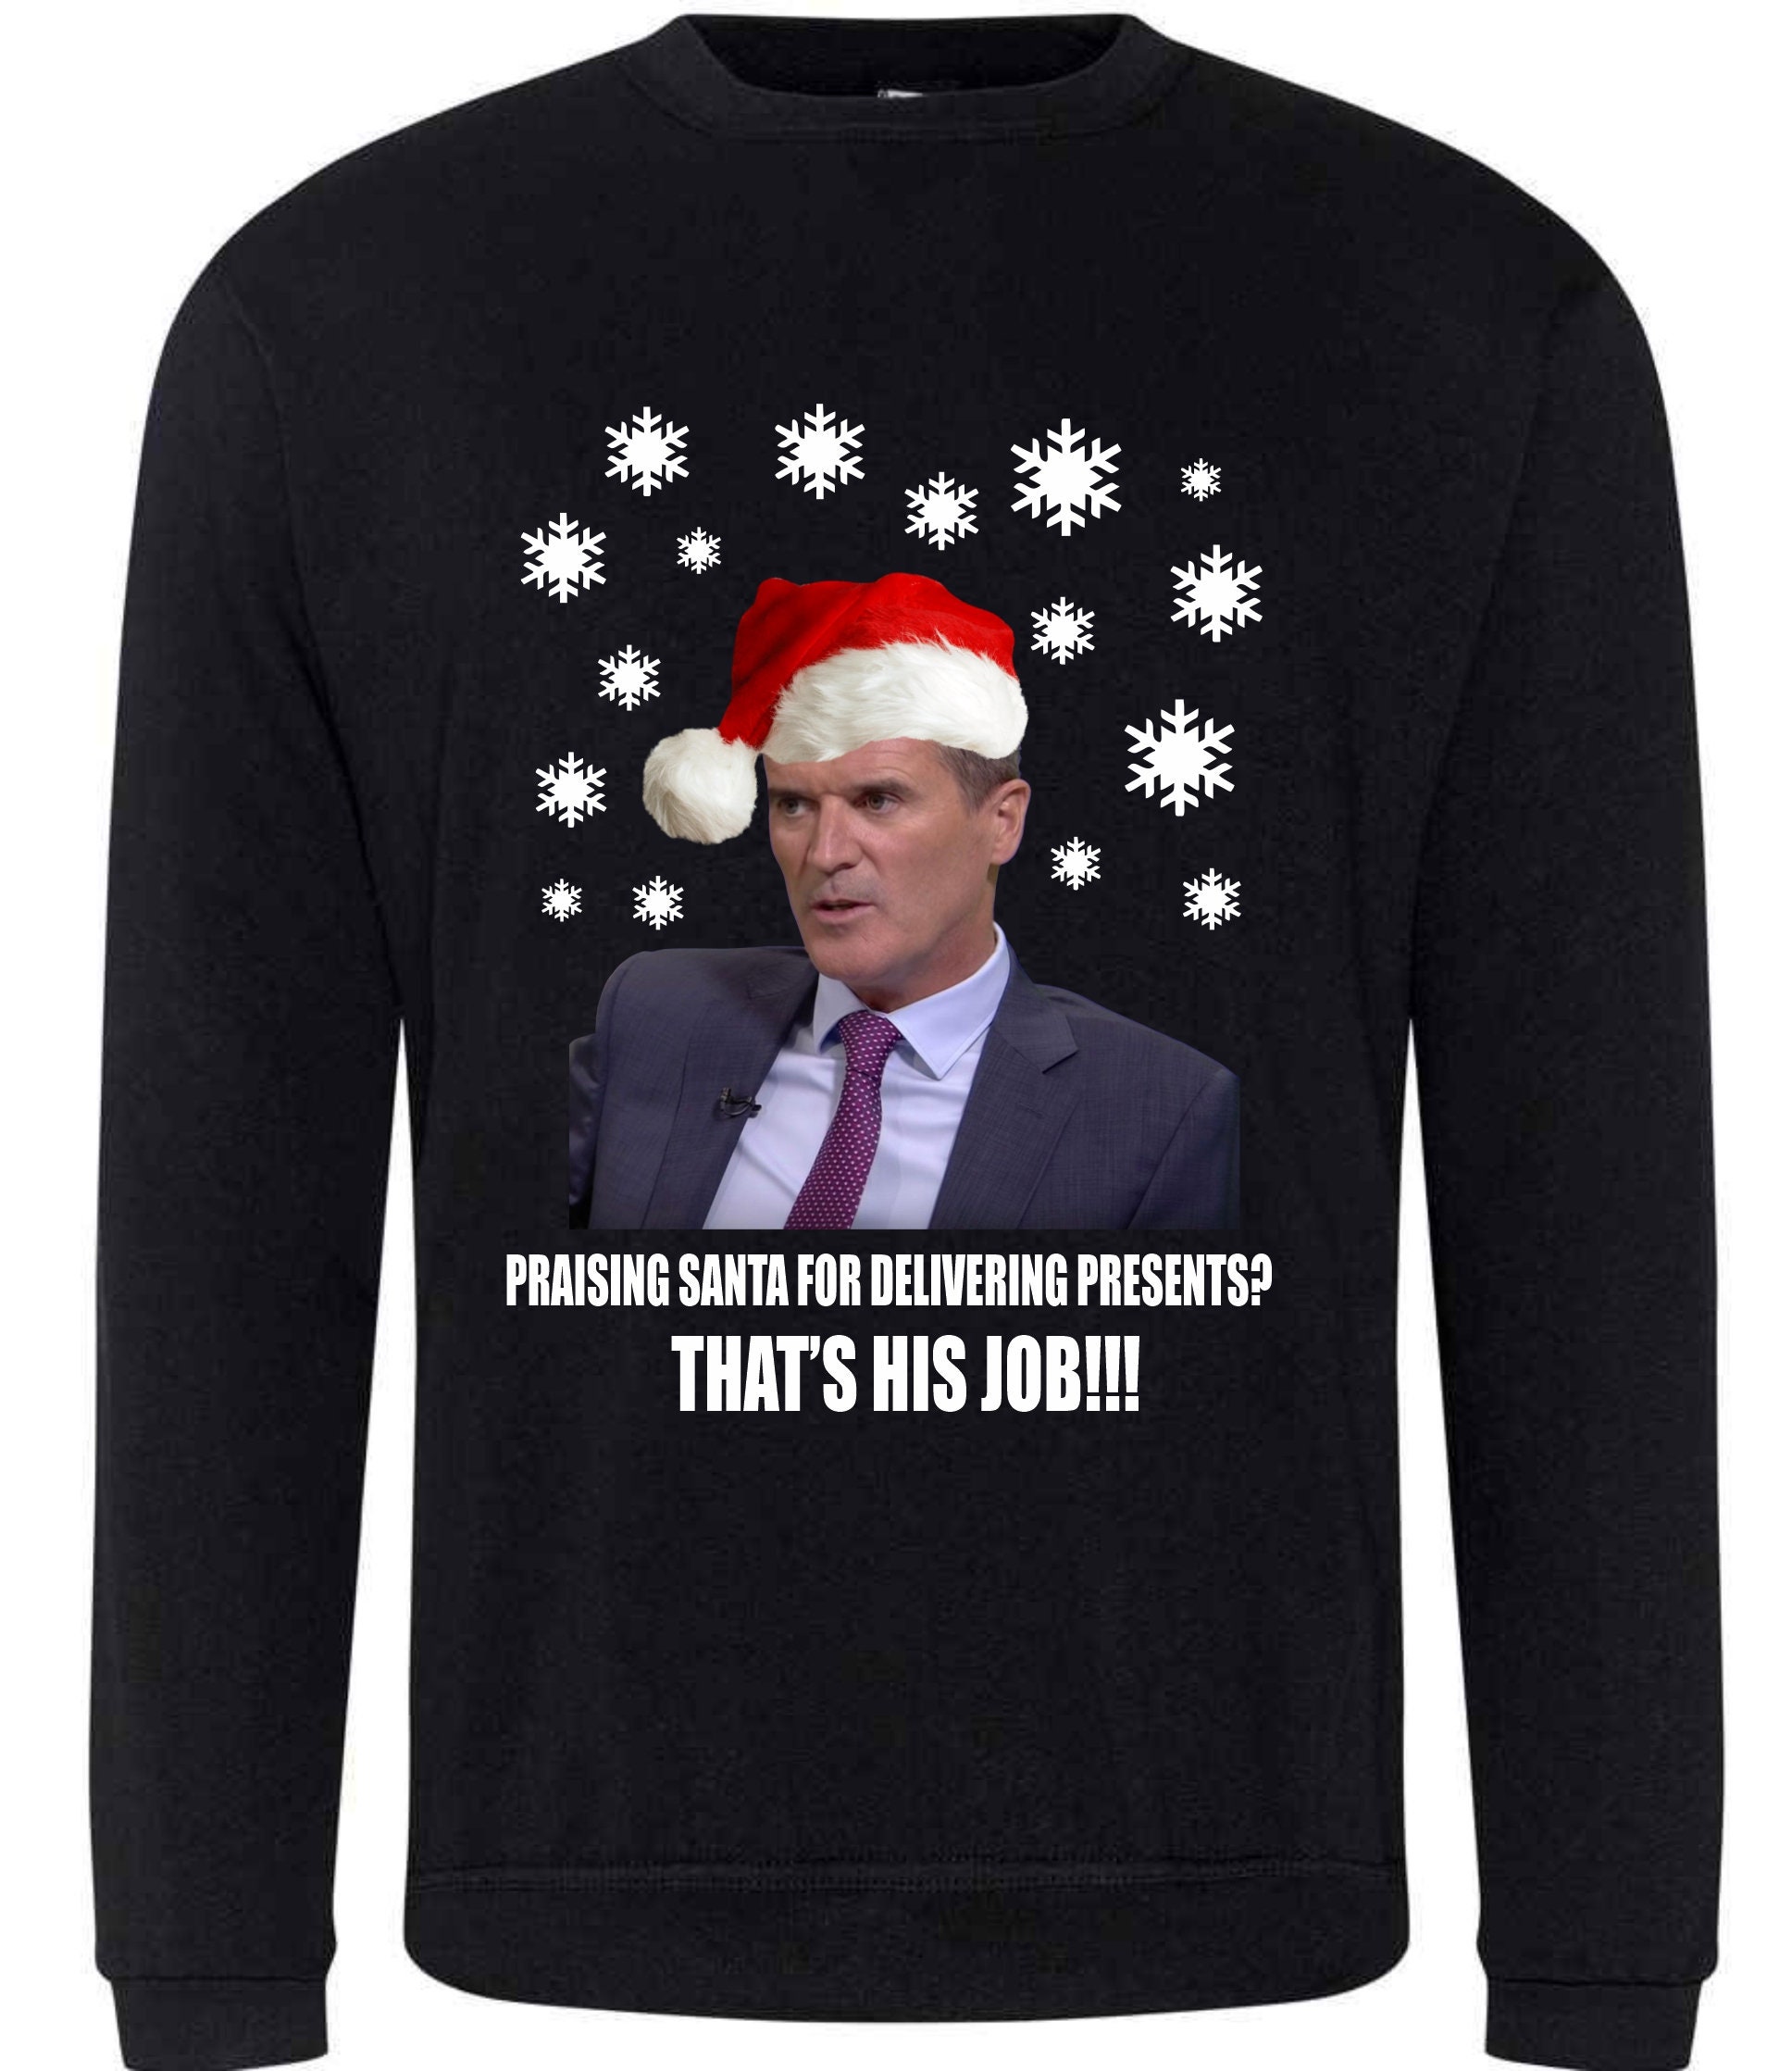 Praising Santa For Delivering Presents, That's His Job, Roy Keane Funny Christmas sweater